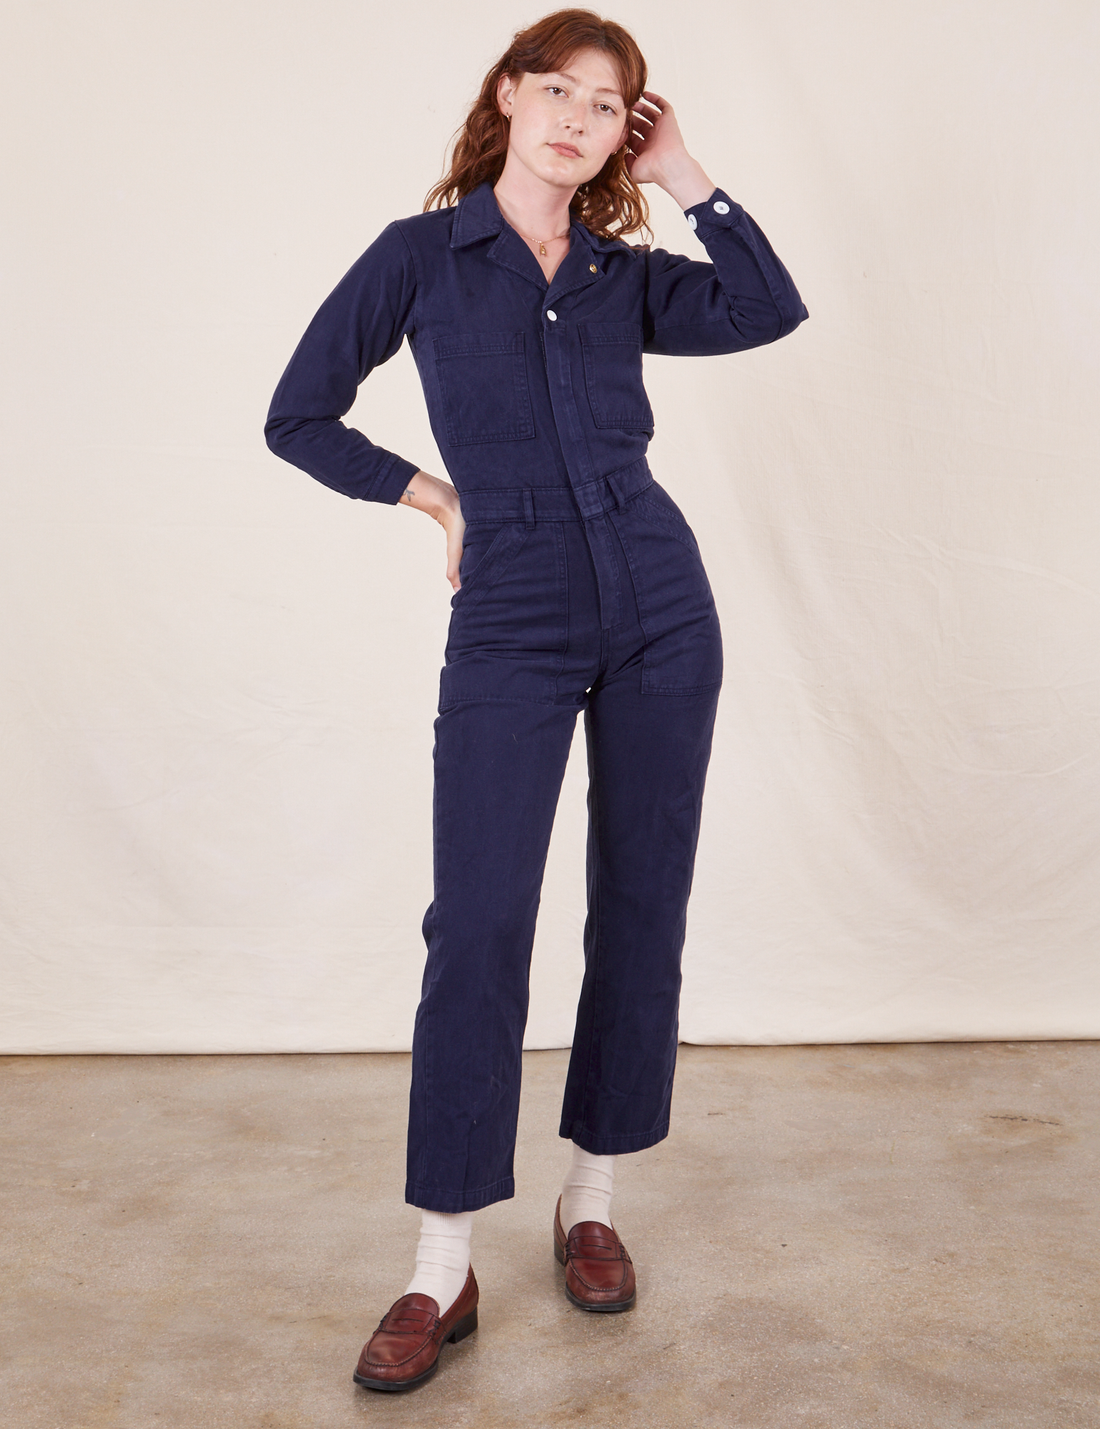 Alex is 5'8" and wearing XS Everyday Jumpsuit in Navy Blue